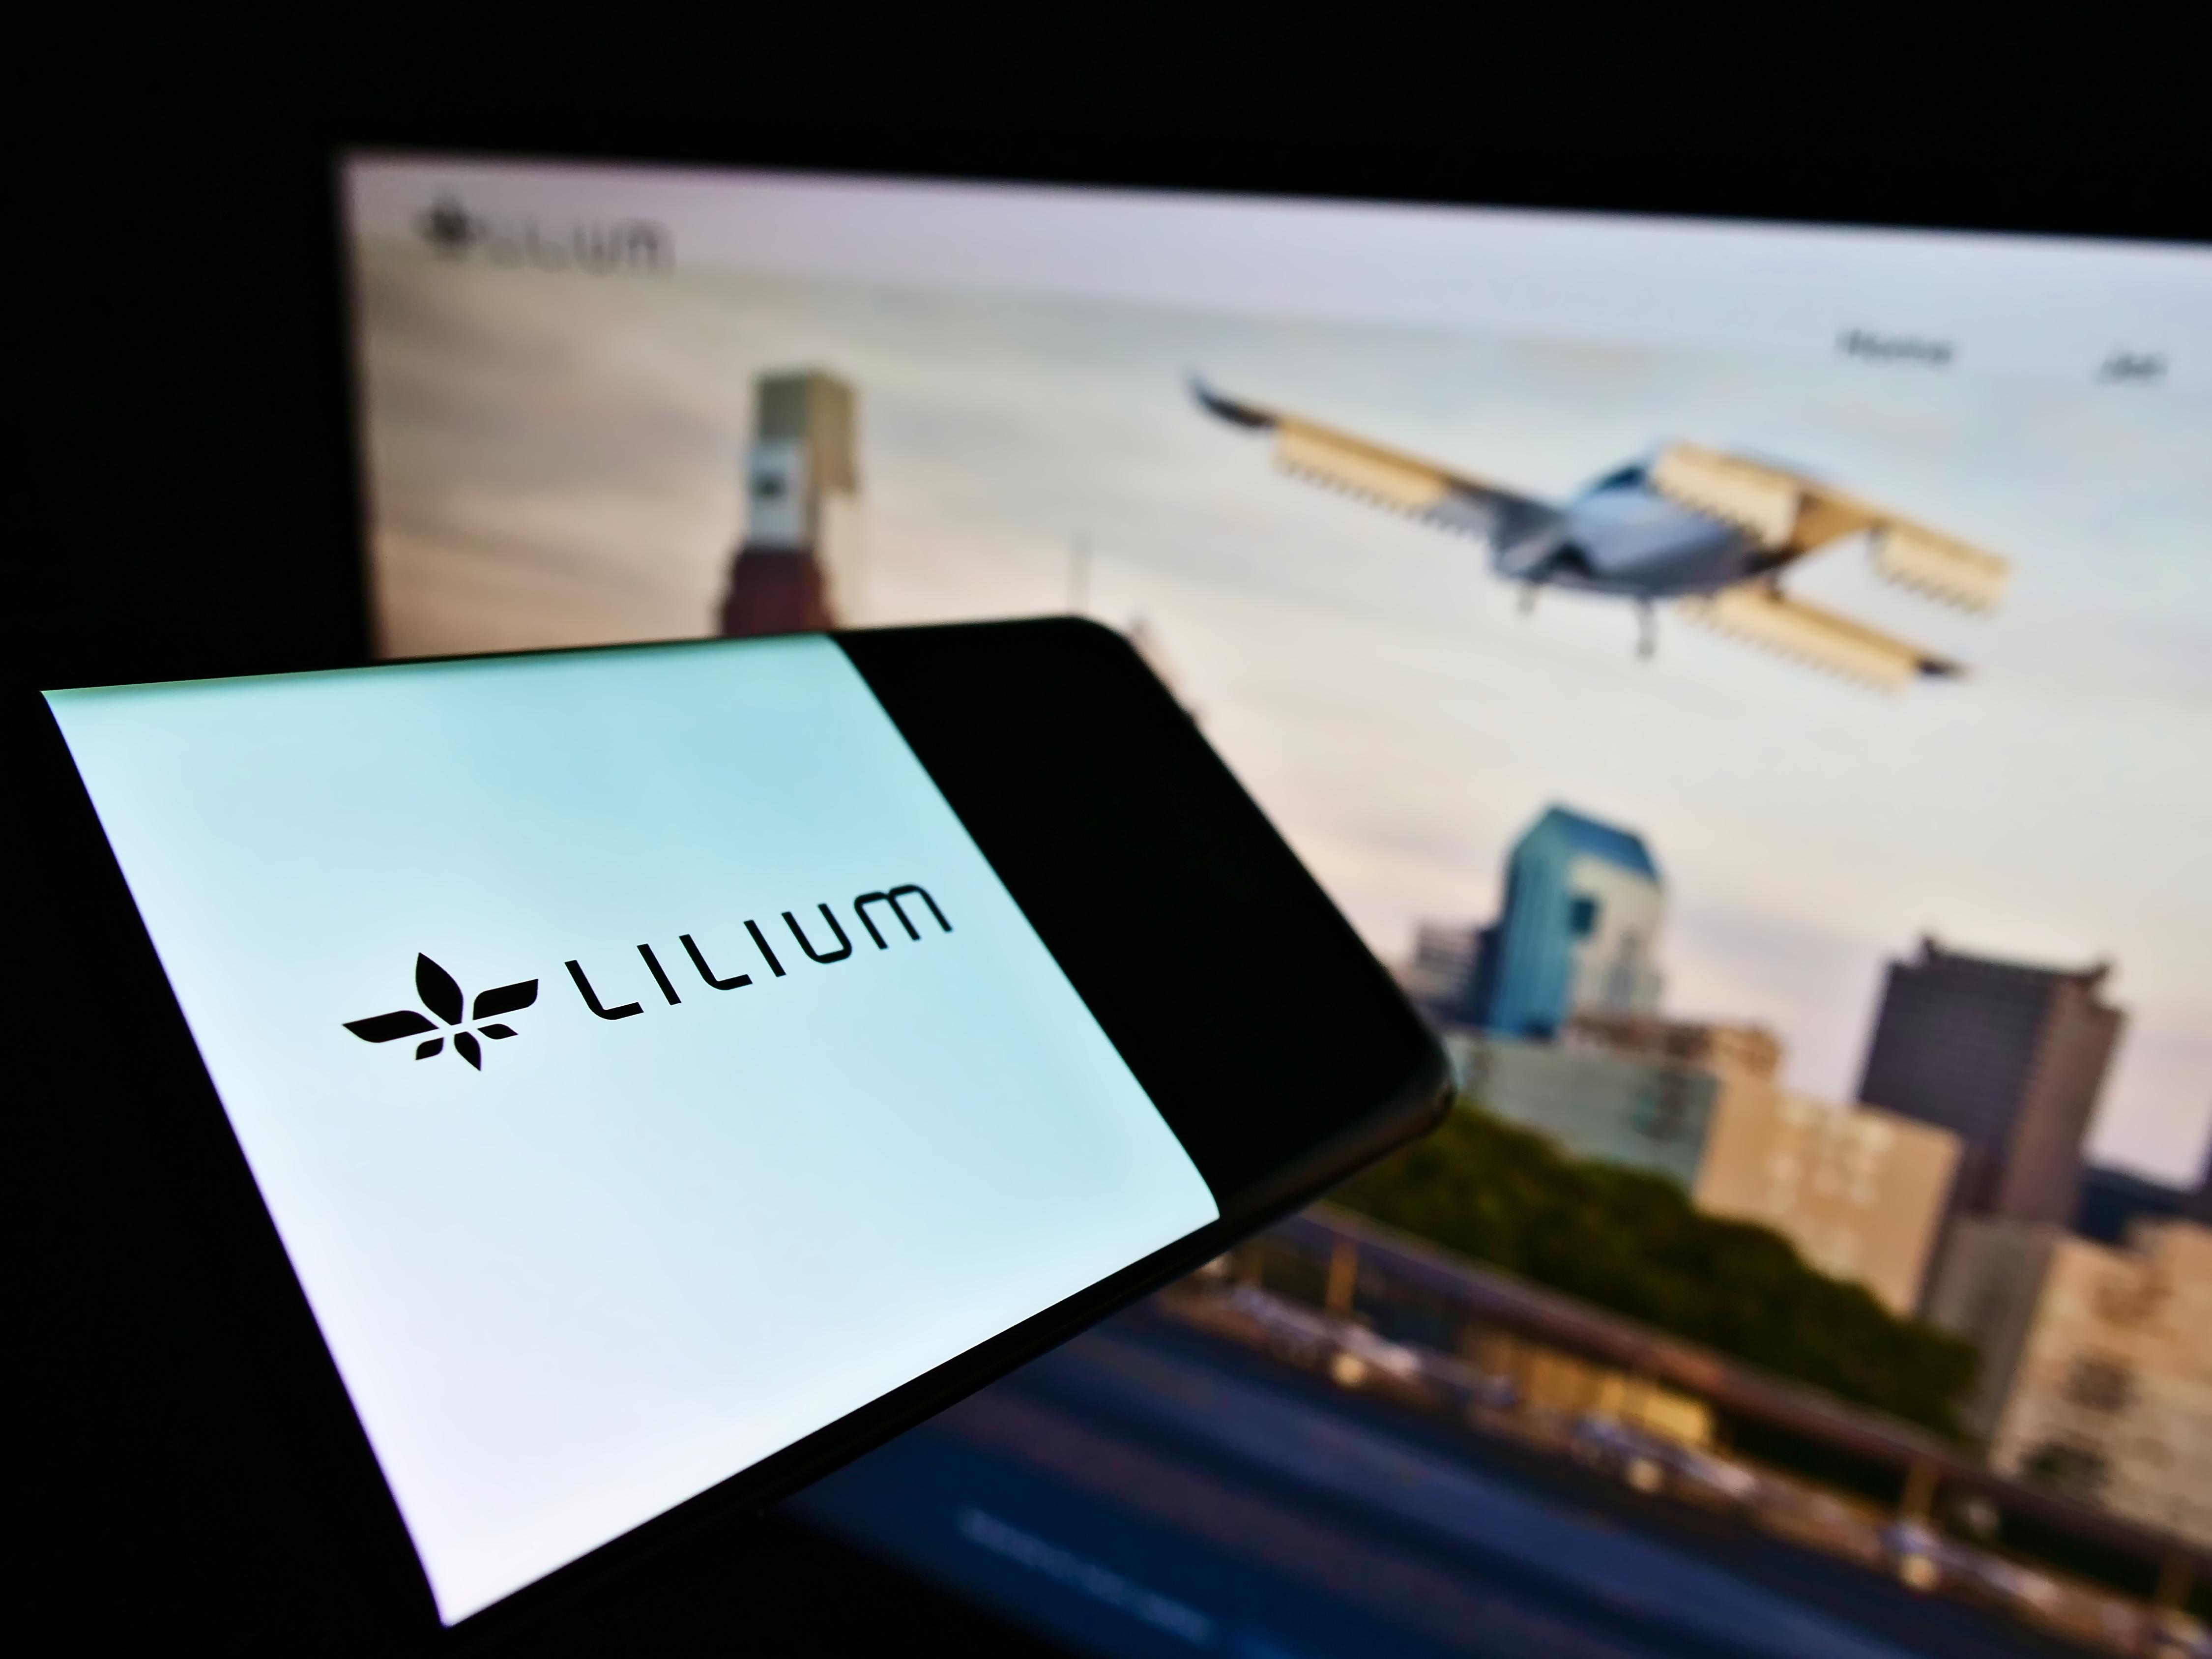 Stuttgart, Germany - 02-26-2021: Cellphone with company logo of German airplane manufacturer Lilium GmbH (Lilium Jet) on screen in front of website. Focus on center of phone display. Unmodified photo.